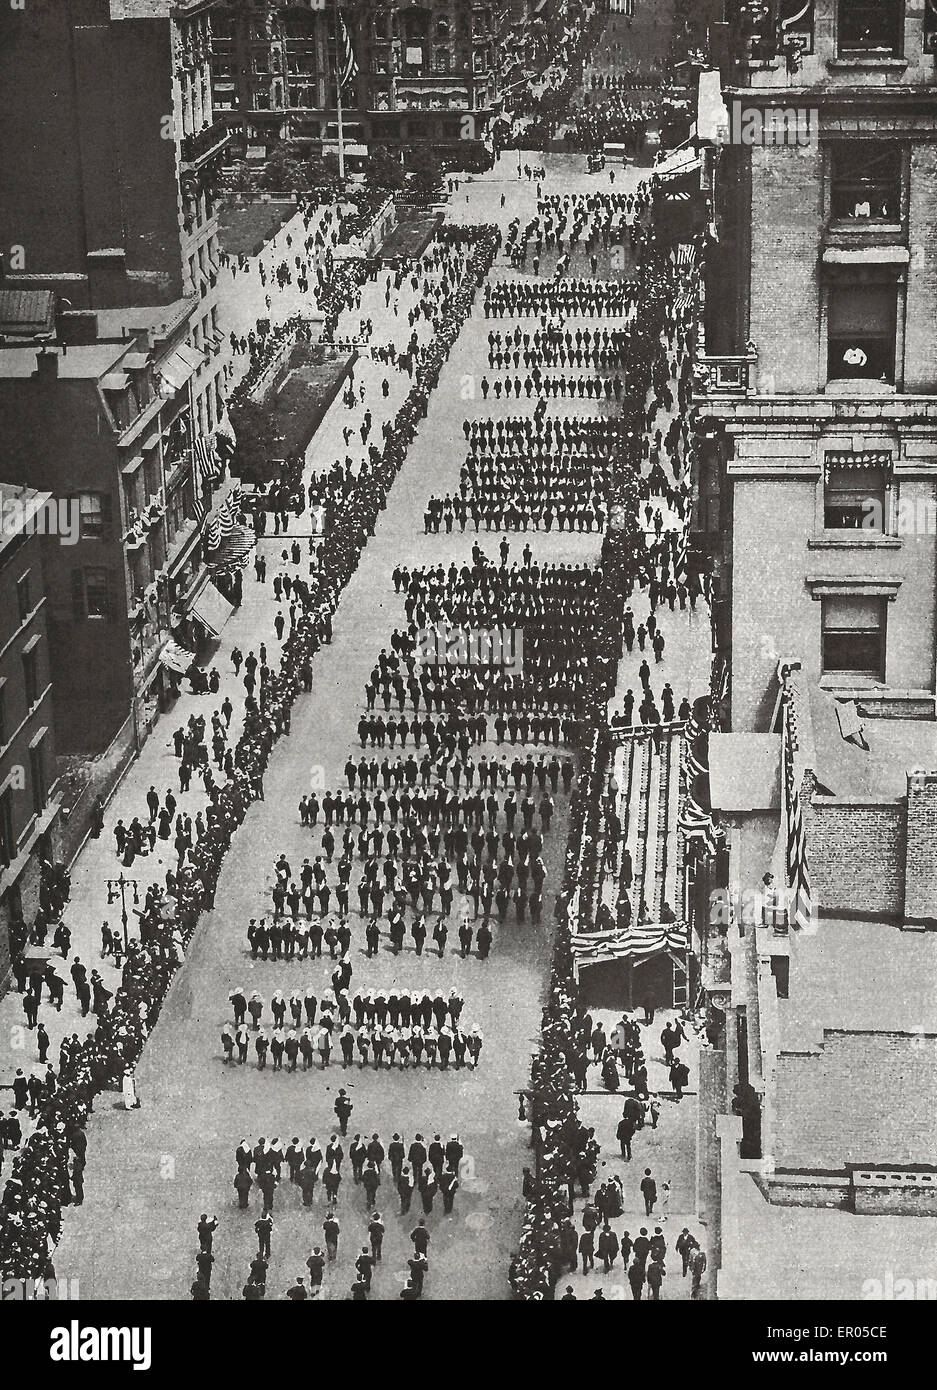 A Preparedness Parade - New York Business men, one hundred and fifty thoudand strong, march up Fifth Avenue, demonstrating for preparedness  1917 Stock Photo